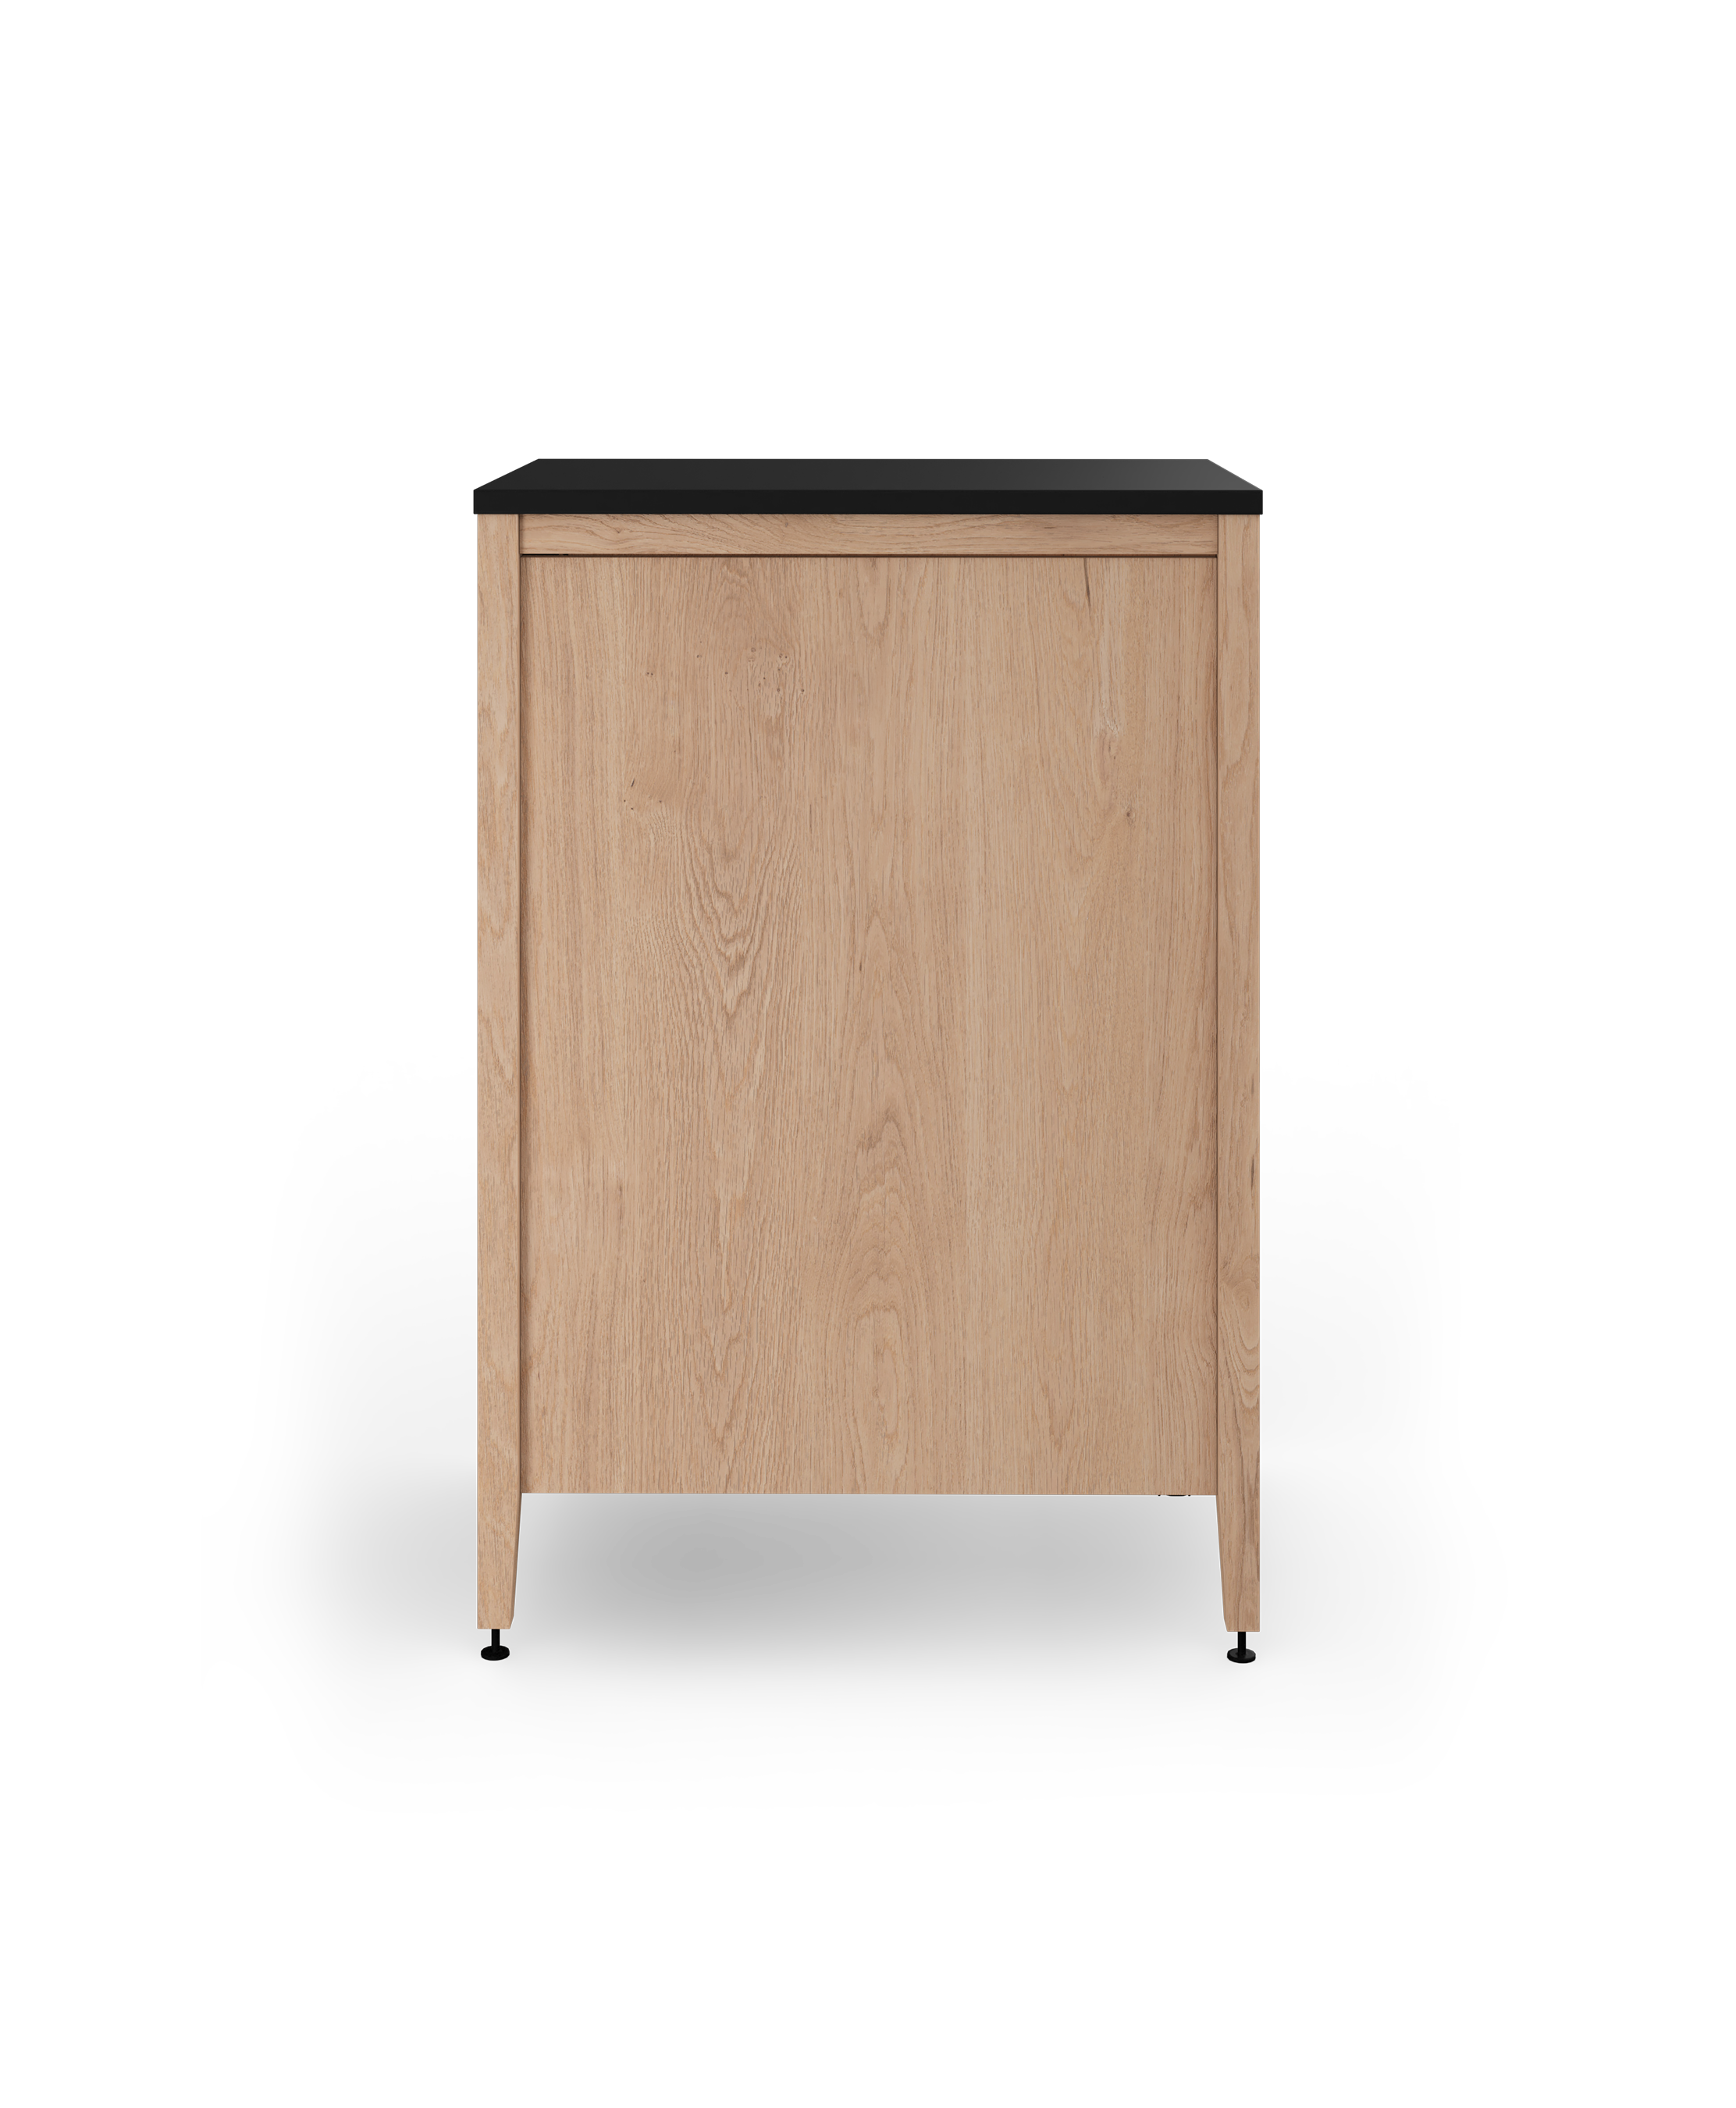 Coquo modular kitchen trash cabinet with two drawers in natural oak. 
